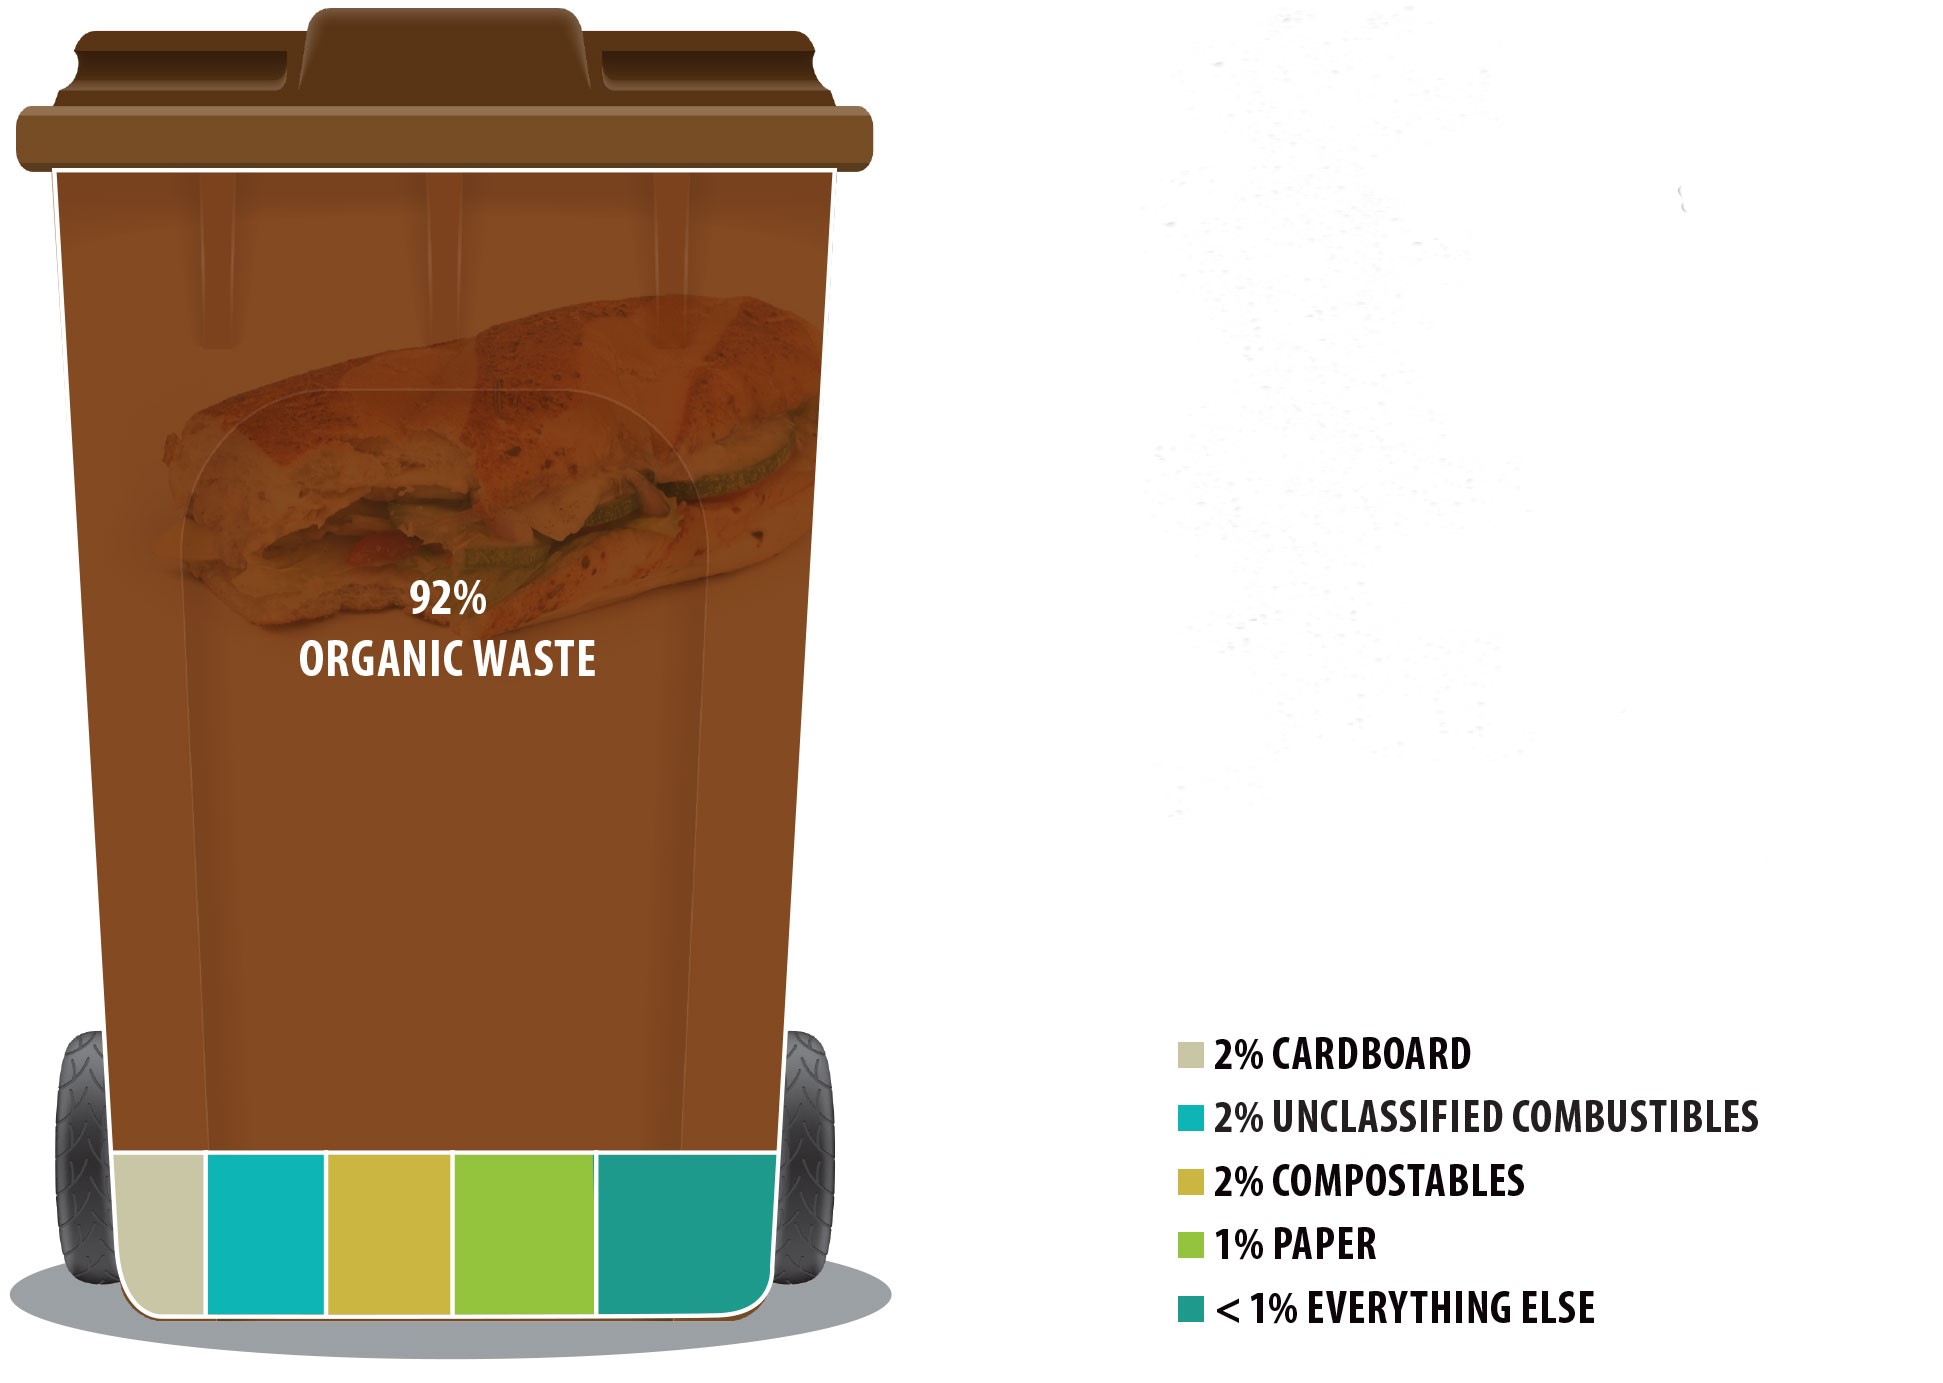 Shows the breakdown of waste in a commercial organic waste bin